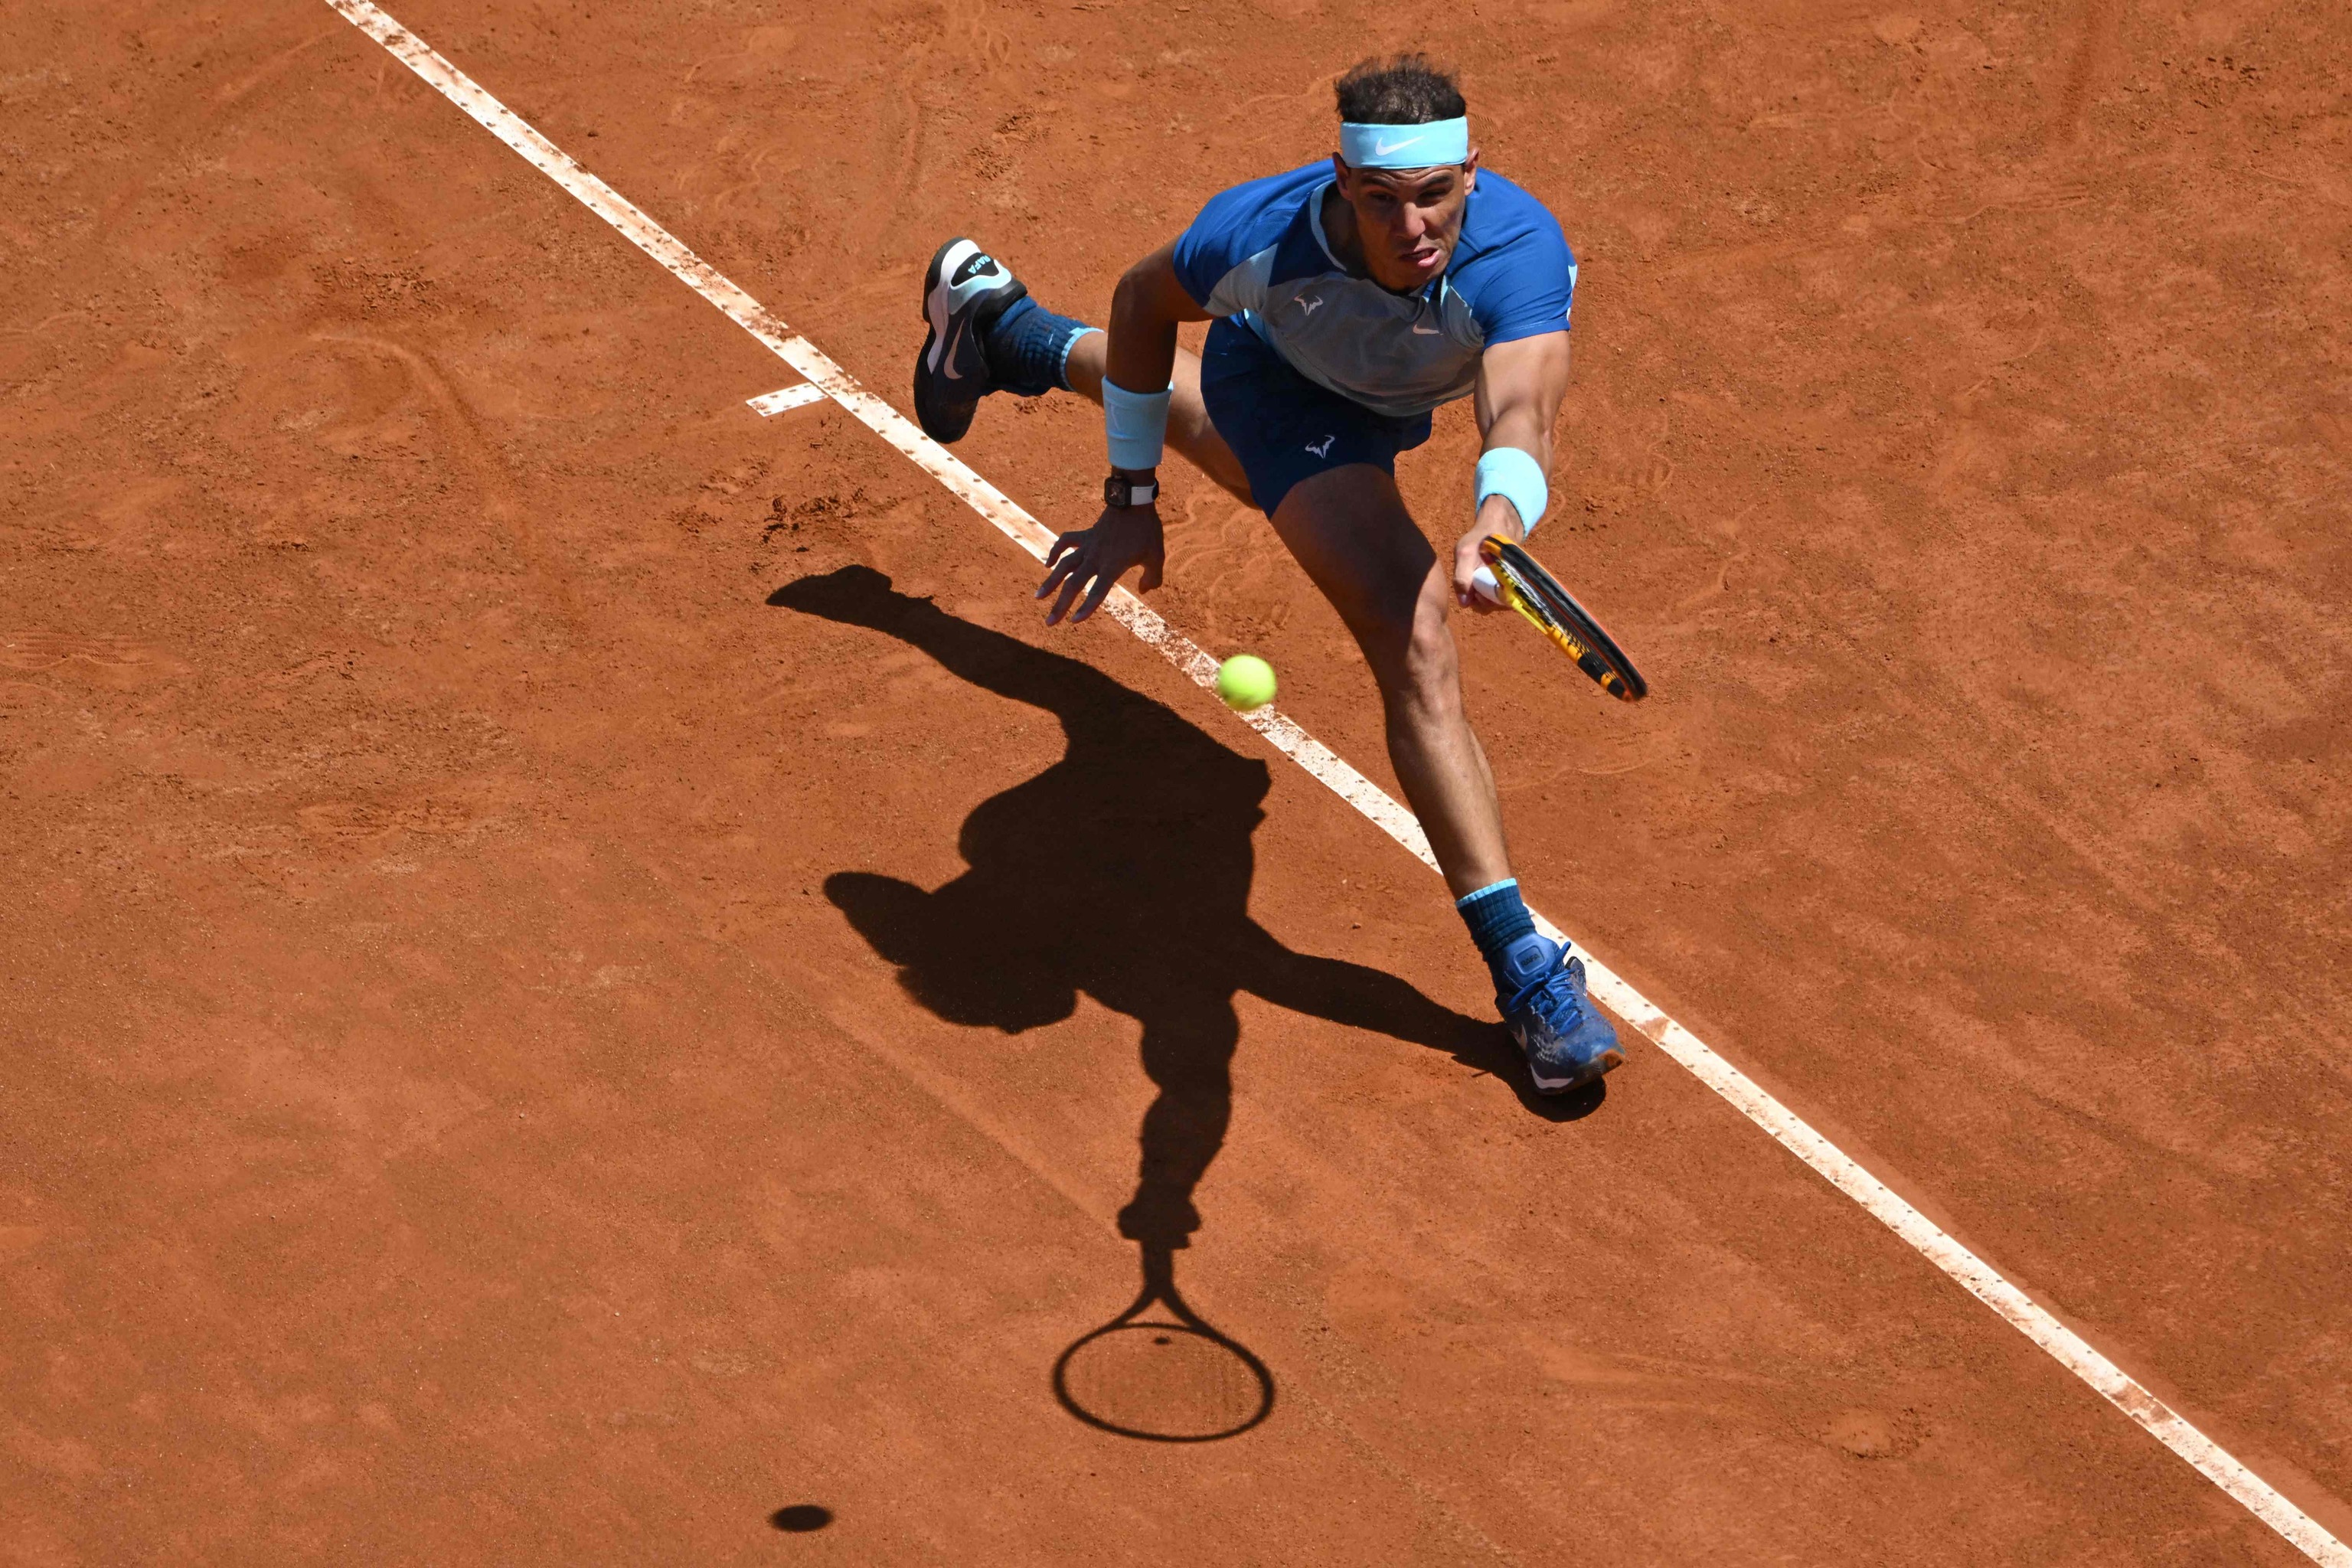 Nadal made a forceful comeback during the match against Isner in Rome.